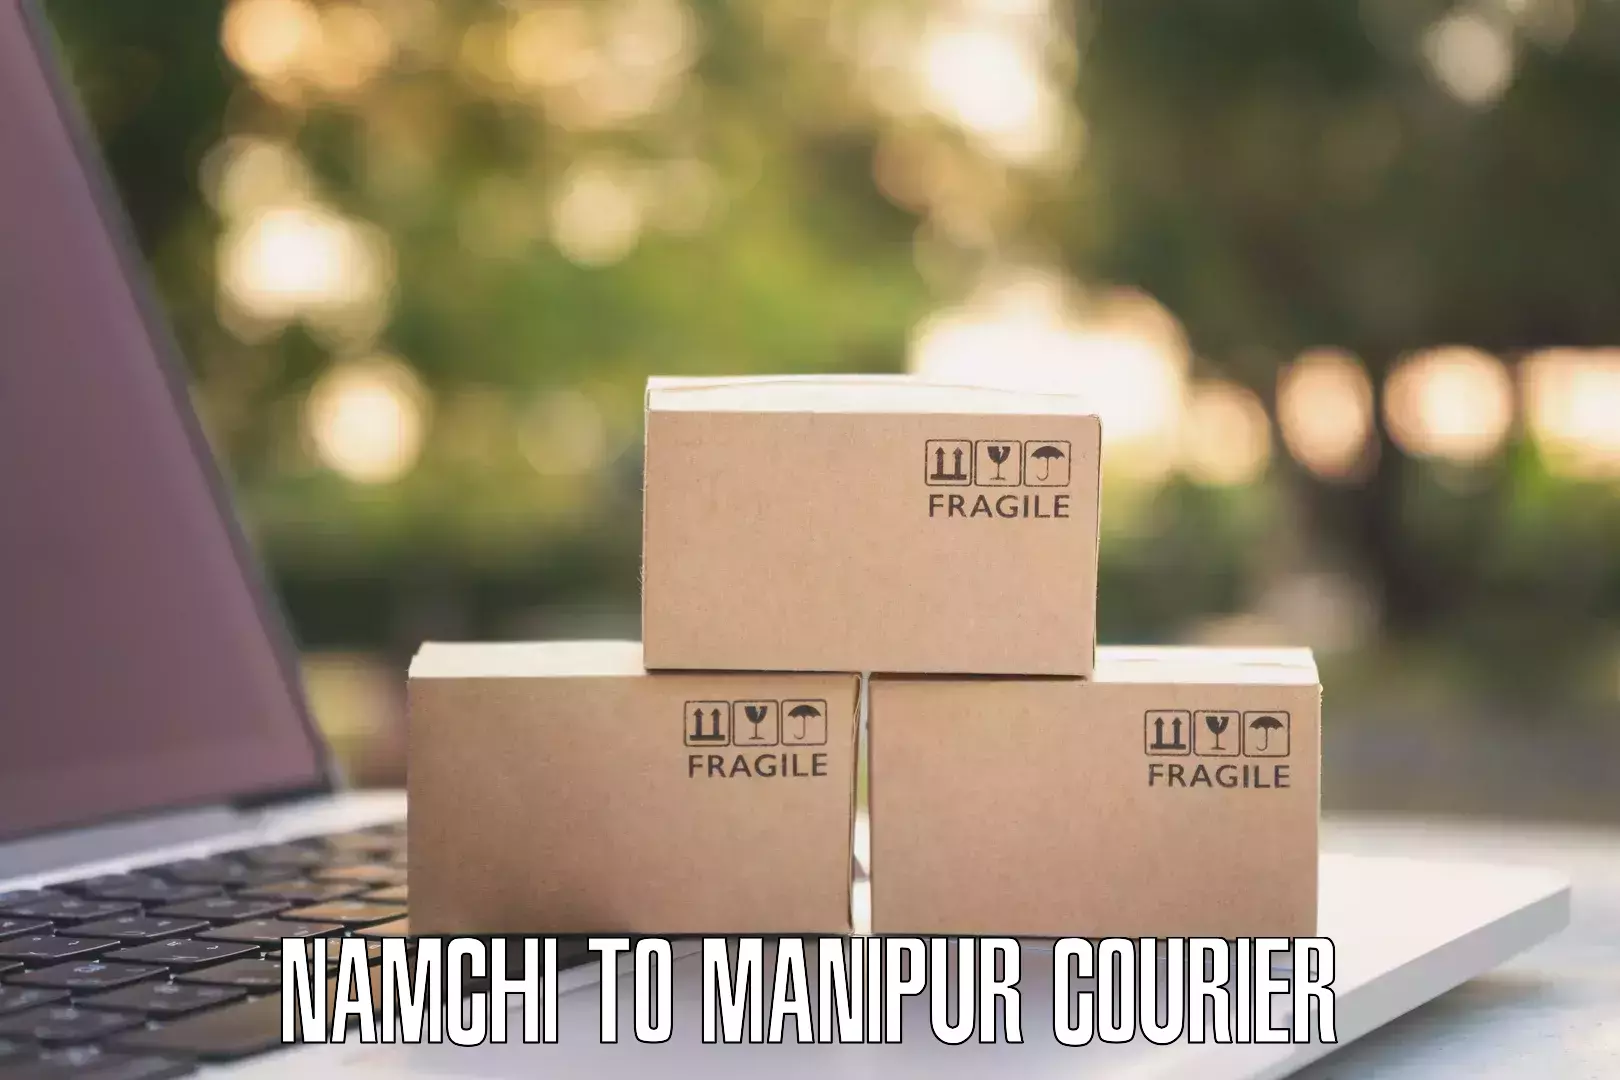 Online shipping calculator Namchi to Manipur